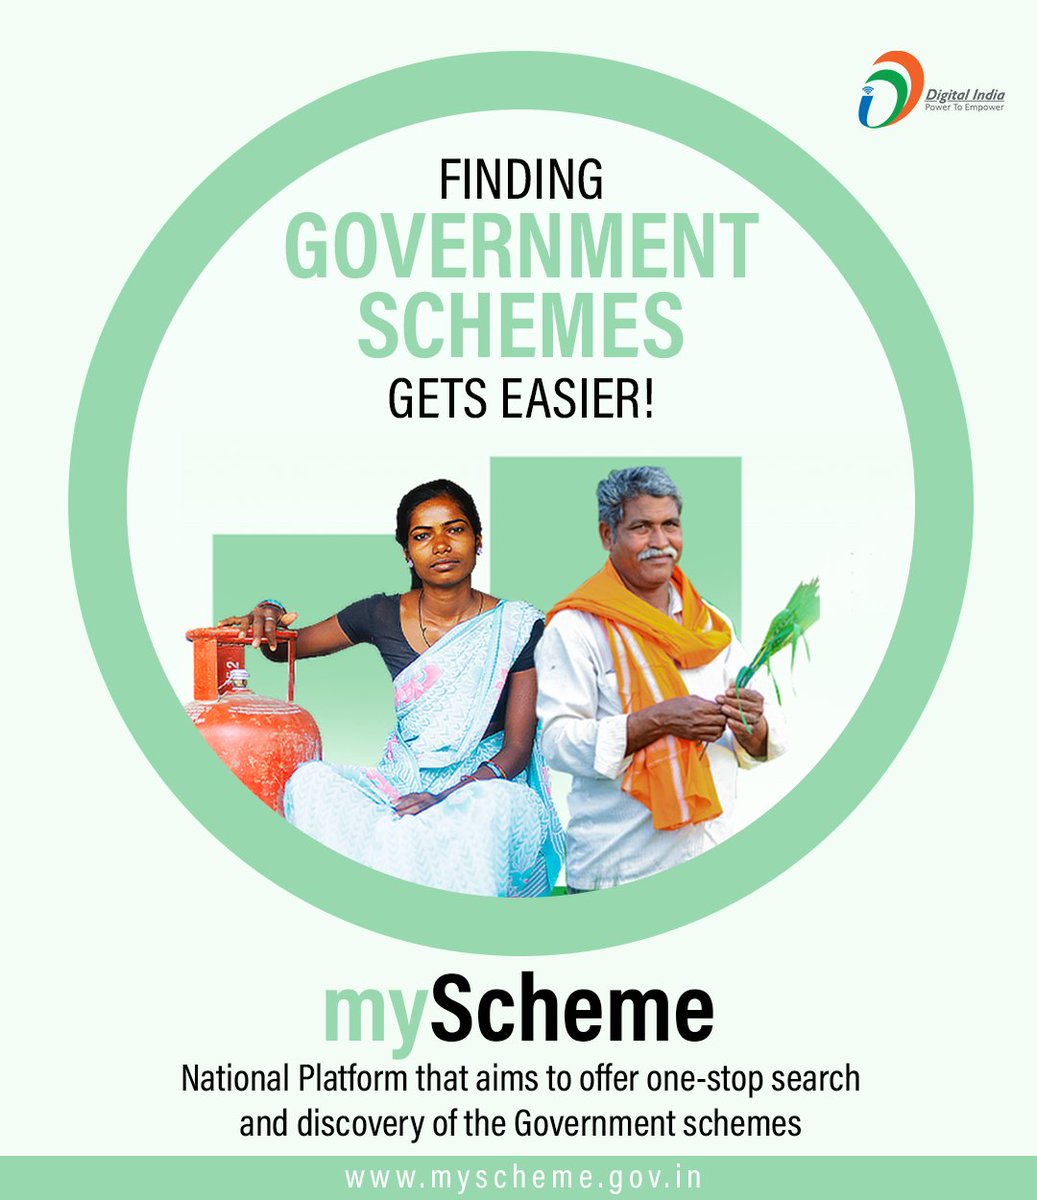 💻 myScheme is a National Platform that aims to offer one-stop search and discovery of the Government schemes. Visit myscheme.gov.in now. #IndiasTechade #GovernmentSchemes #SchemesForYou #myScheme